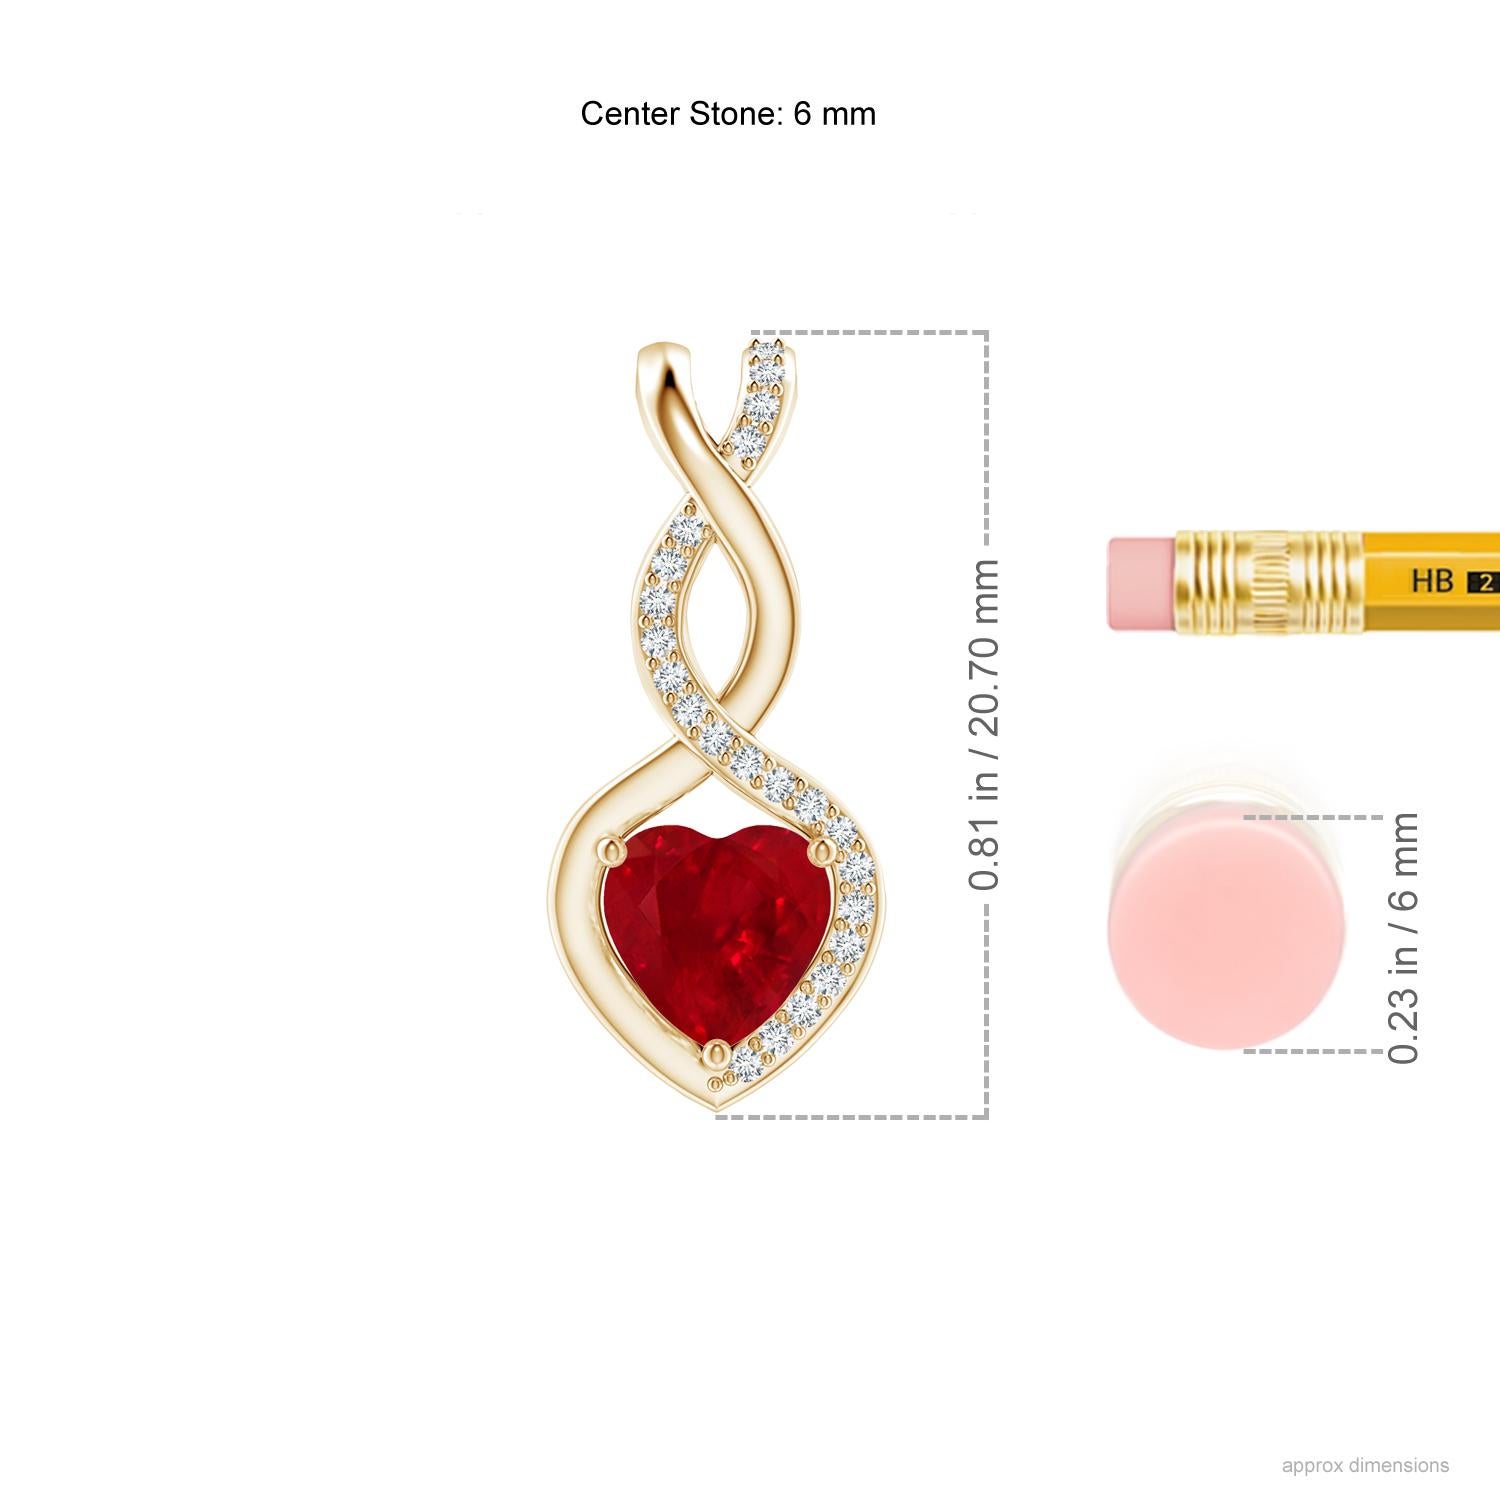 A diamond studded strip entwines with a lustrous metal strip to form an ornate infinity. Floating amid the graceful infinity is a heart-shaped bold red ruby in a prong setting. The sparkling diamonds infuse a captivating edge to this Yellow Gold